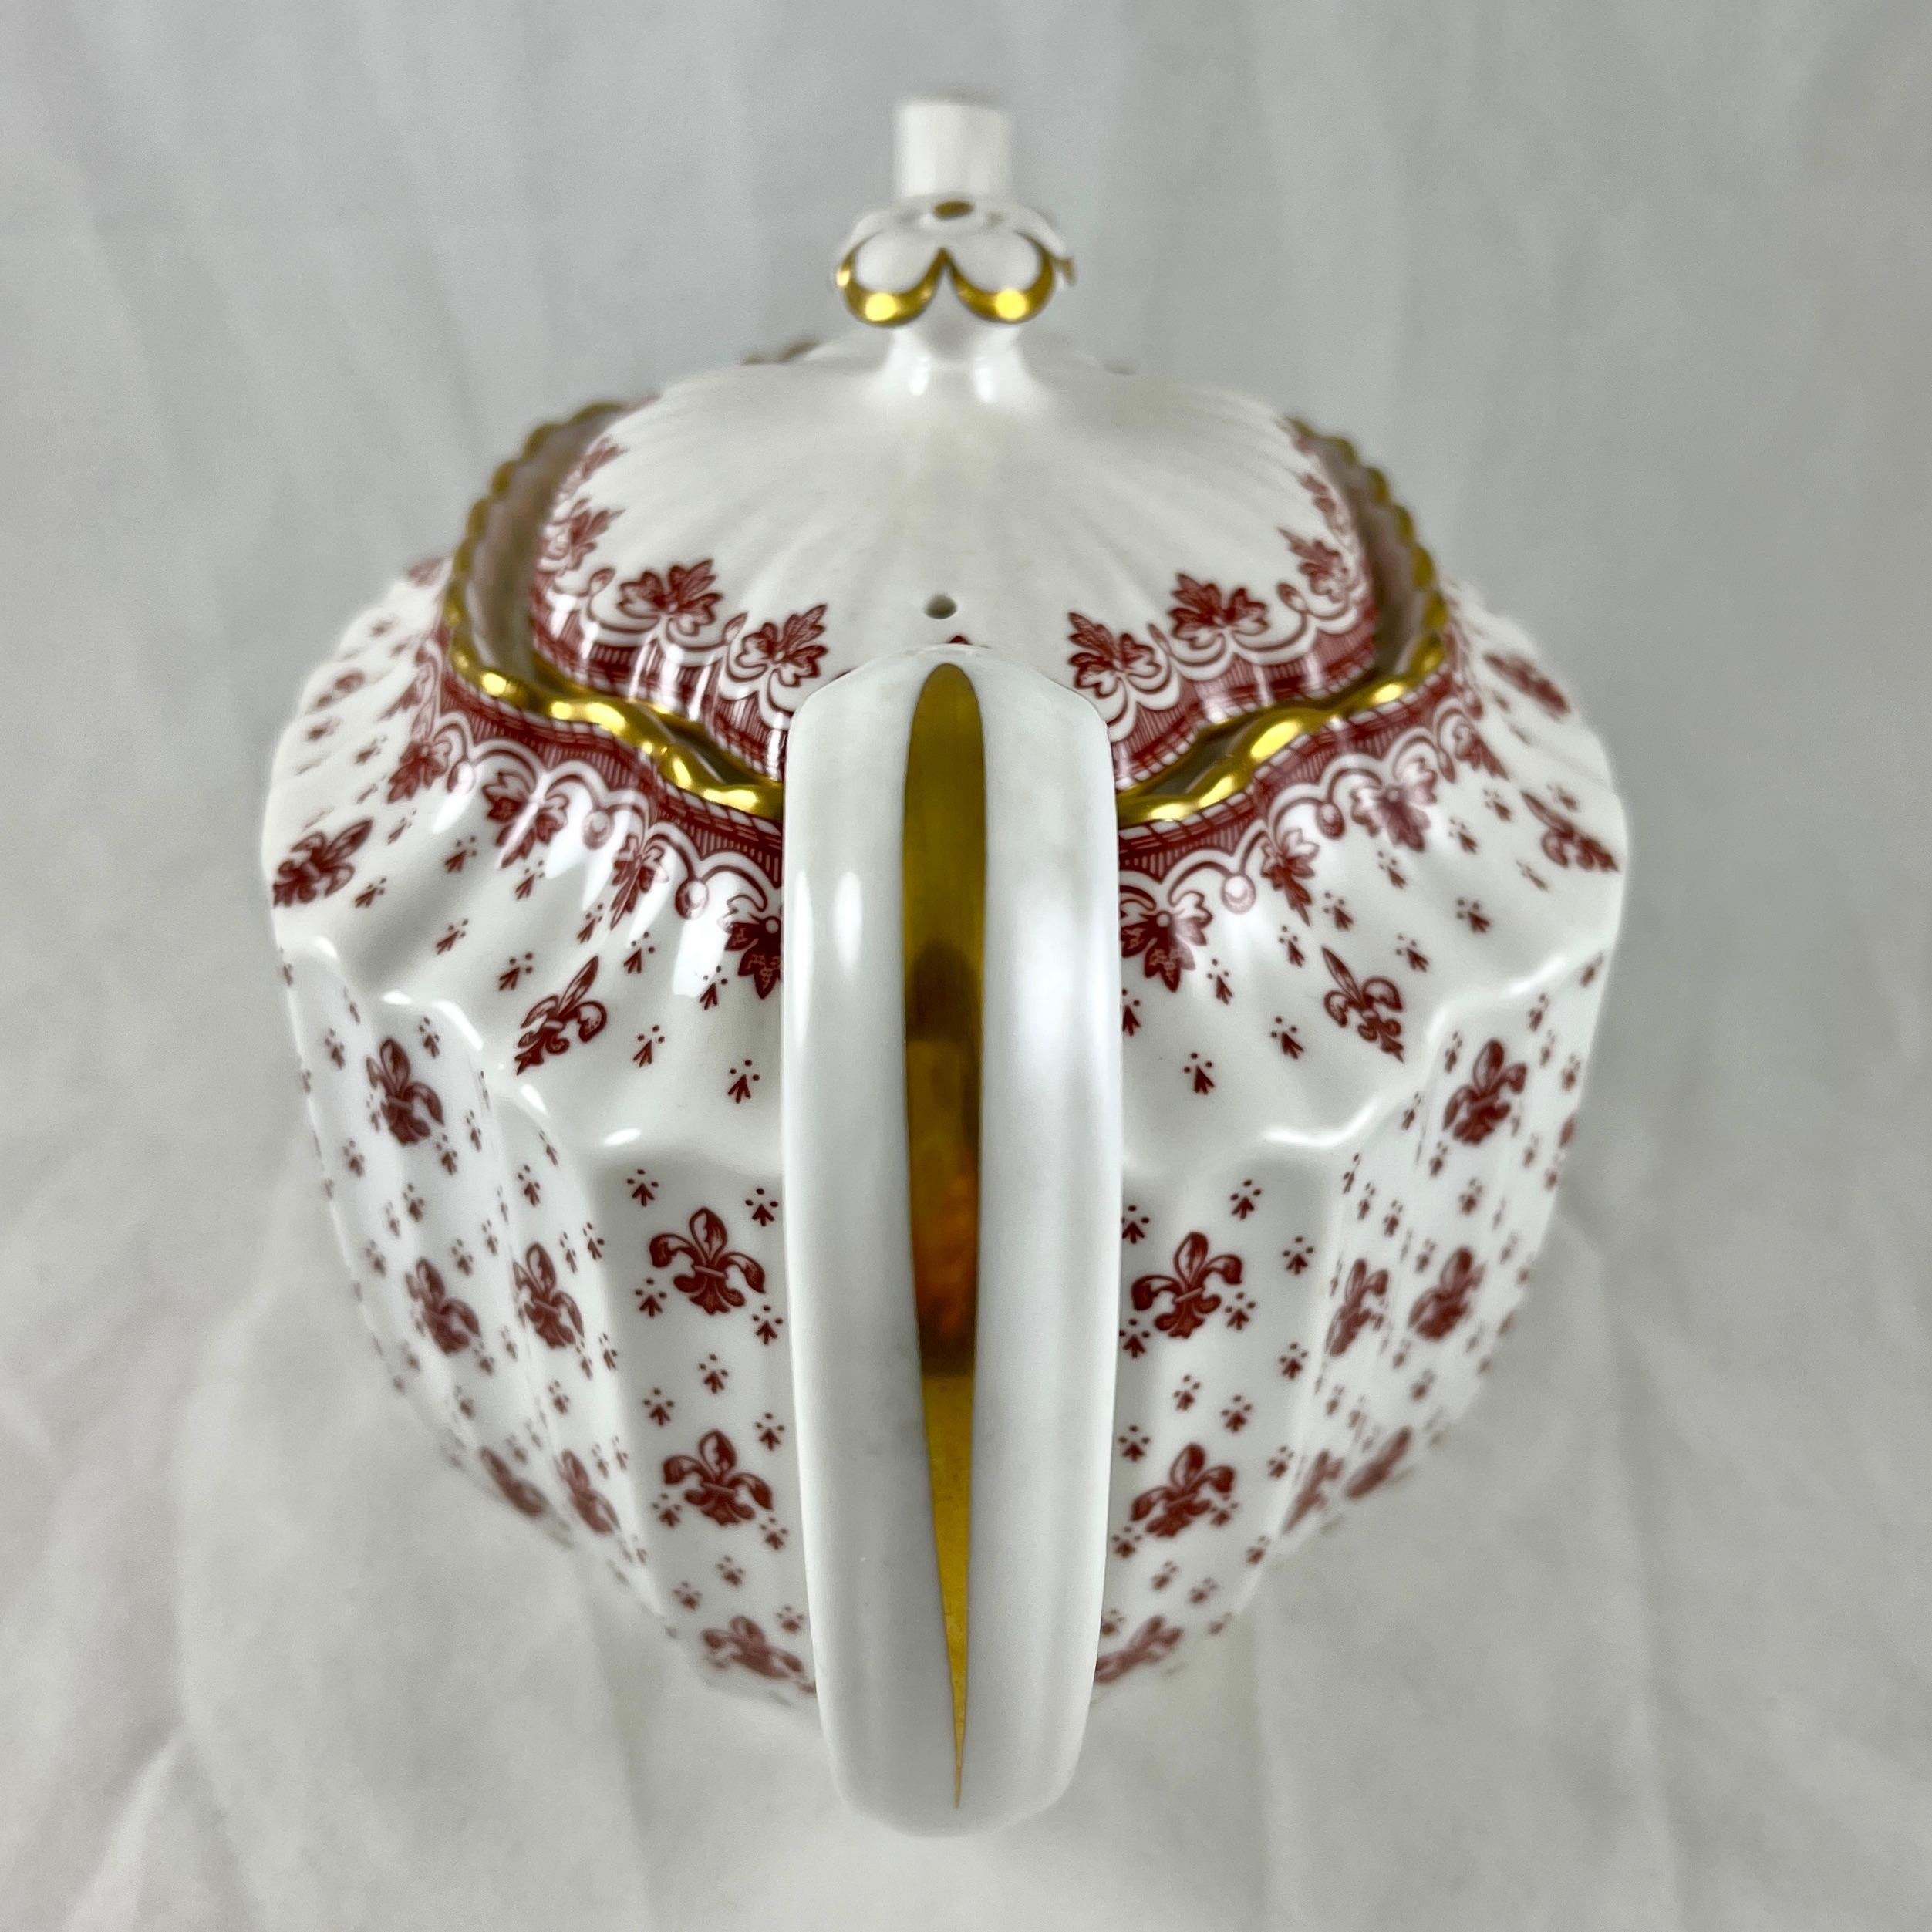 Spode Fleur de Lys Red & Gold Bone China Fluted Chelsea Tea Pot In Excellent Condition For Sale In Philadelphia, PA